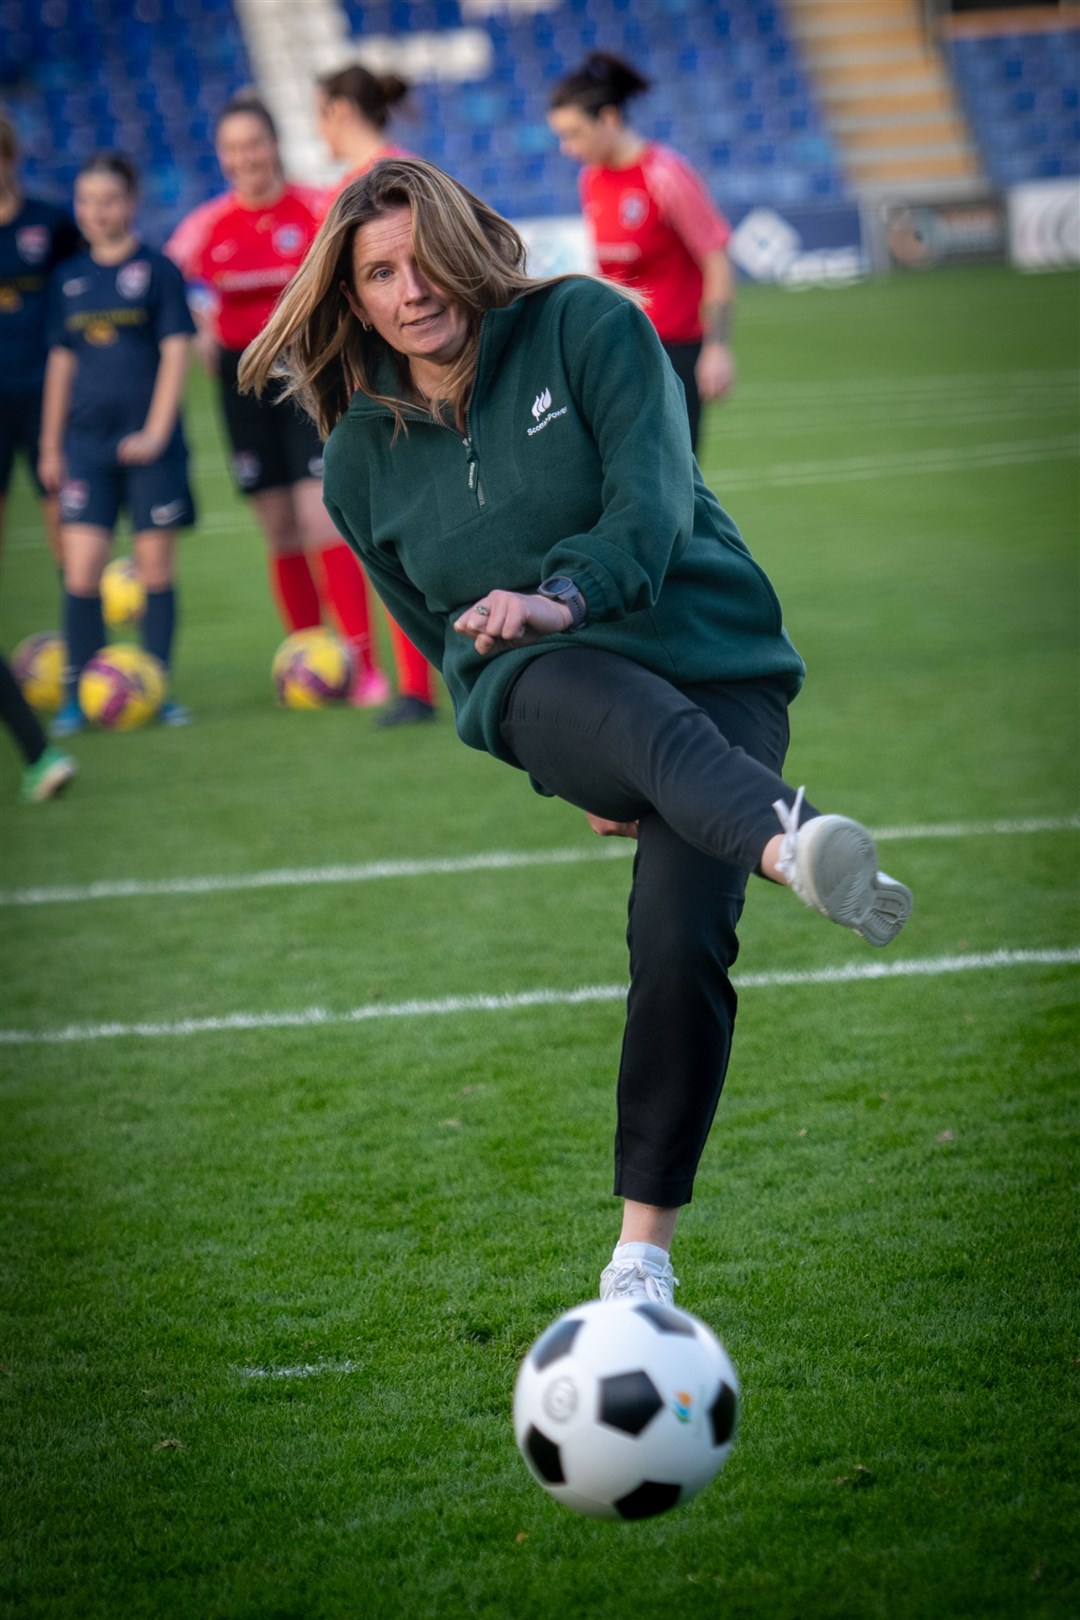 ScottishPower's director of engagement Hazel Gulliver takes a penalty at the Global Energy Stadium. Picture: Callum Mackay